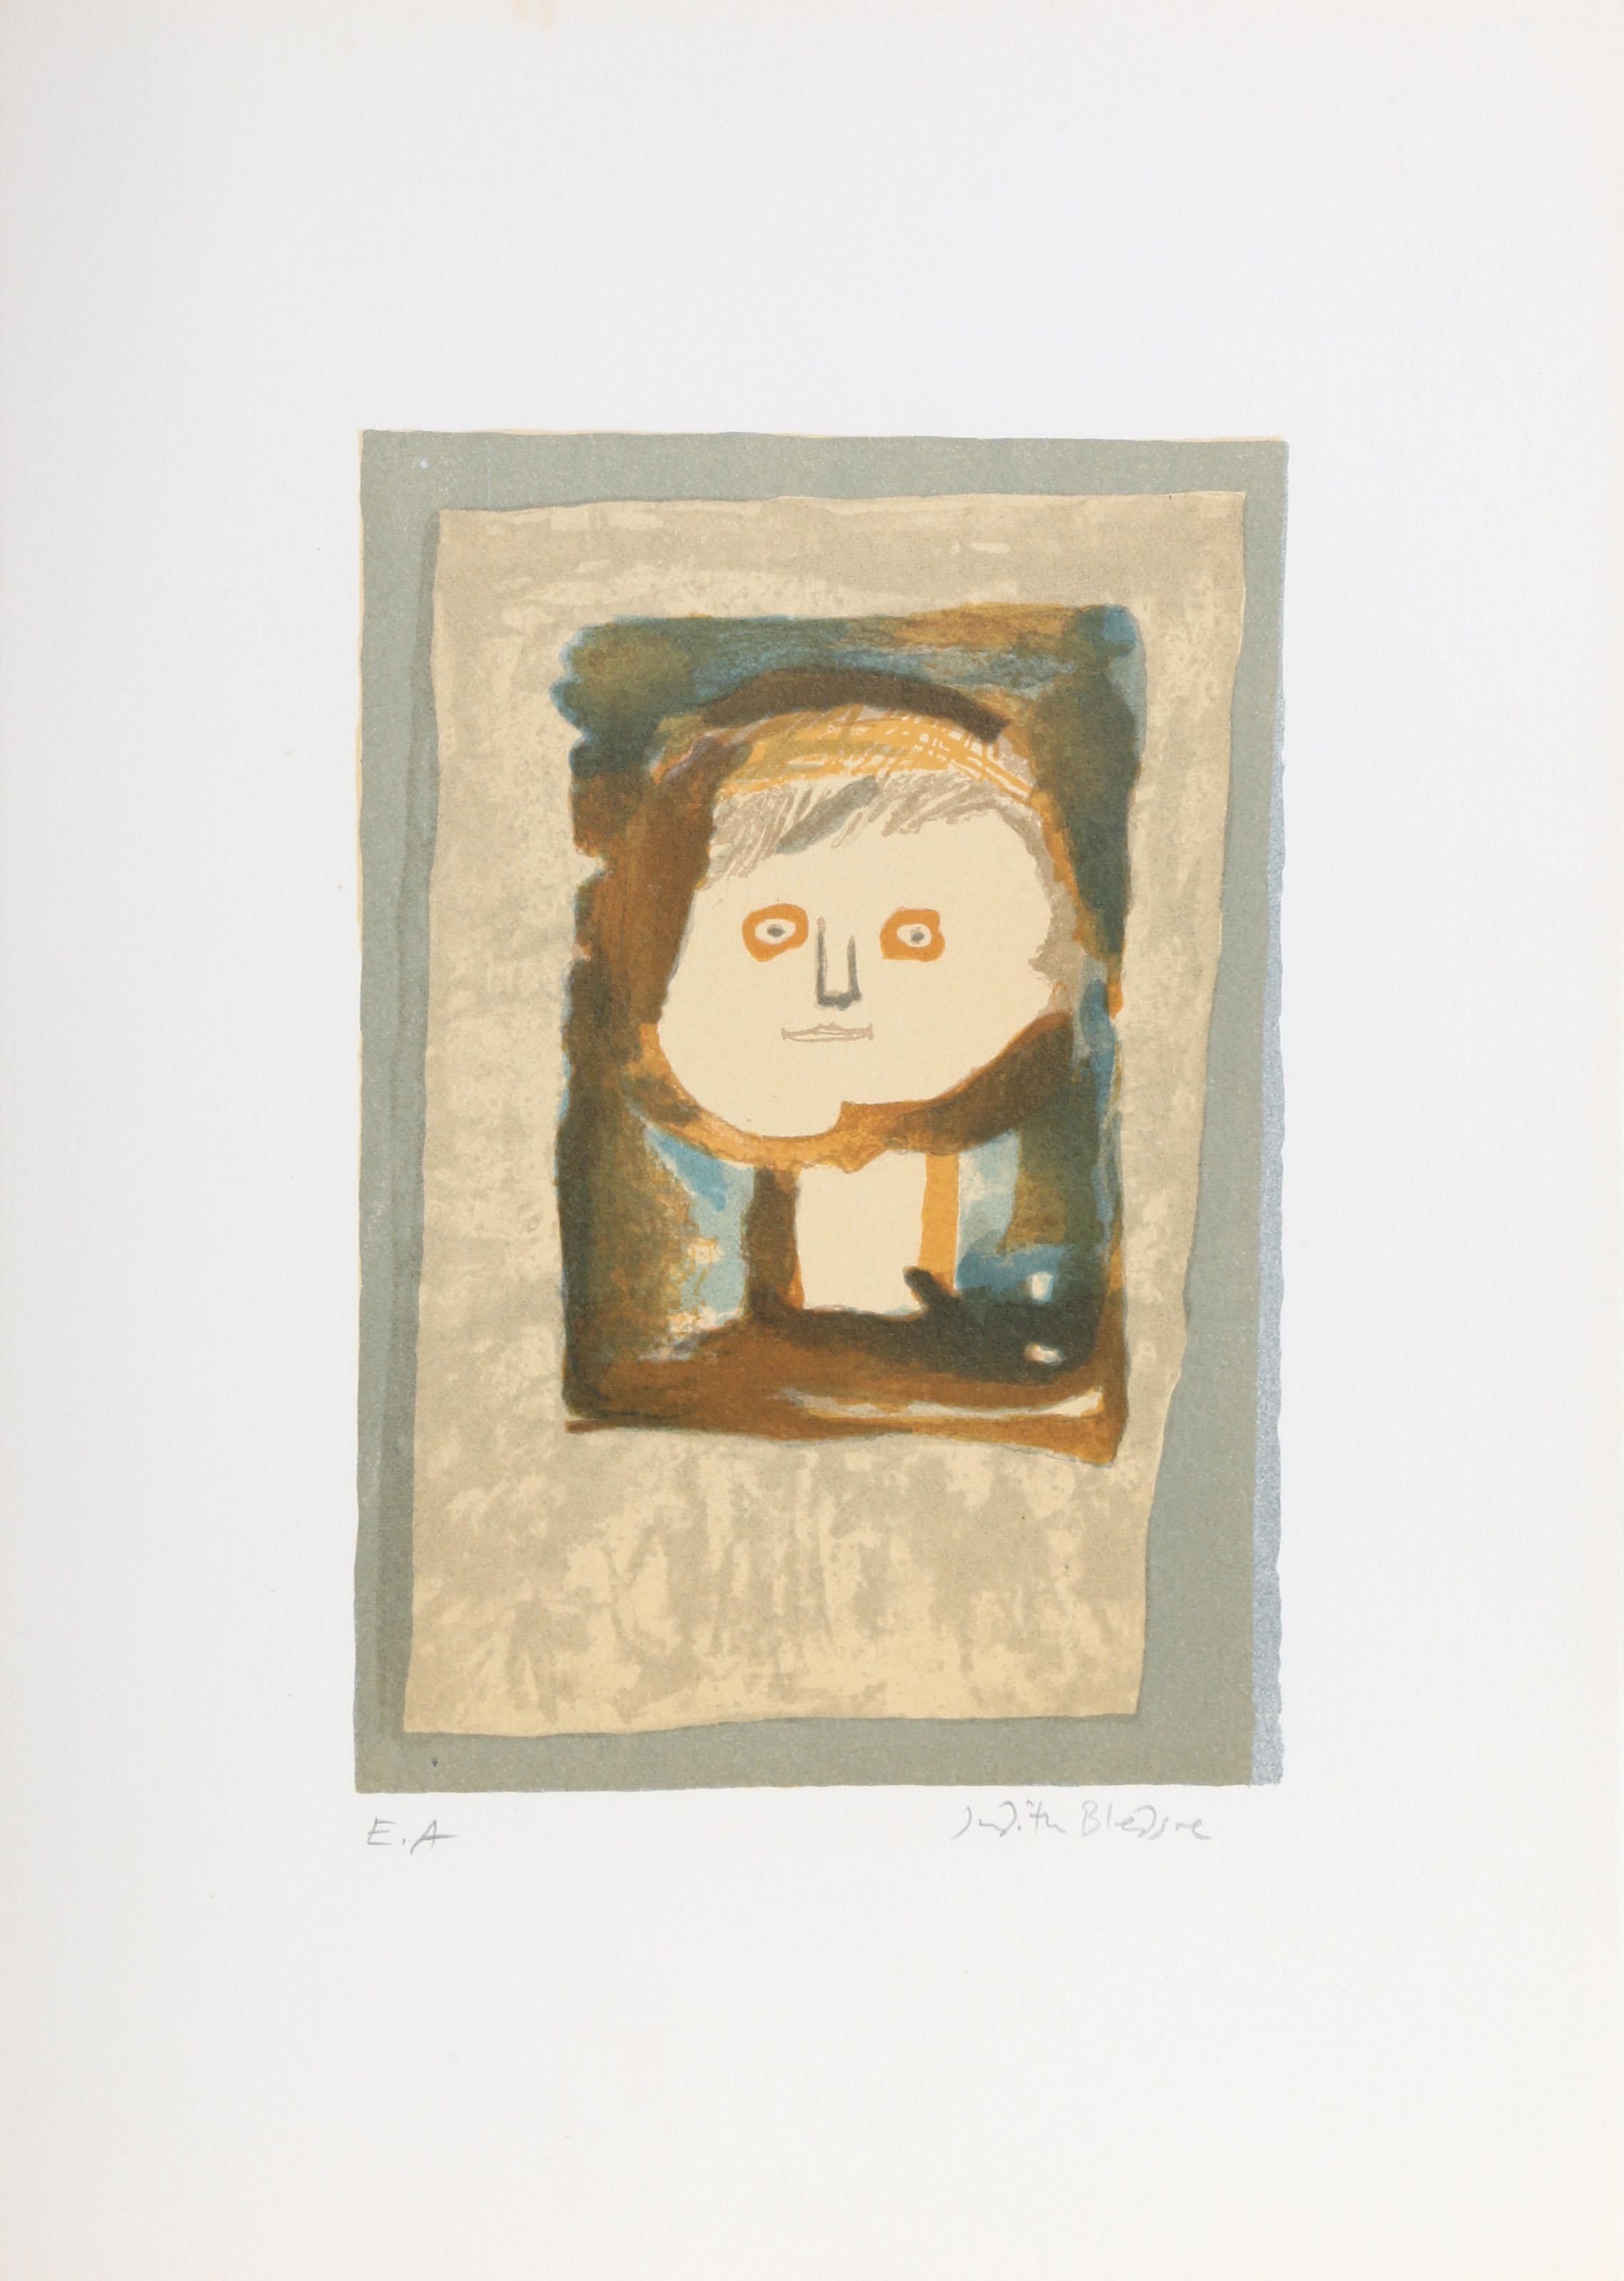 Judith Bledsoe, American (1938 - 2013) -  Petite Portrait - Boy. Year: circa 1974, Medium: Lithograph, signed in pencil, Edition: EA, Image Size: 8 x 6 inches, Size: 15  x 10.5 in. (38.1  x 26.67 cm), Description: In this simple portrait of a boy,